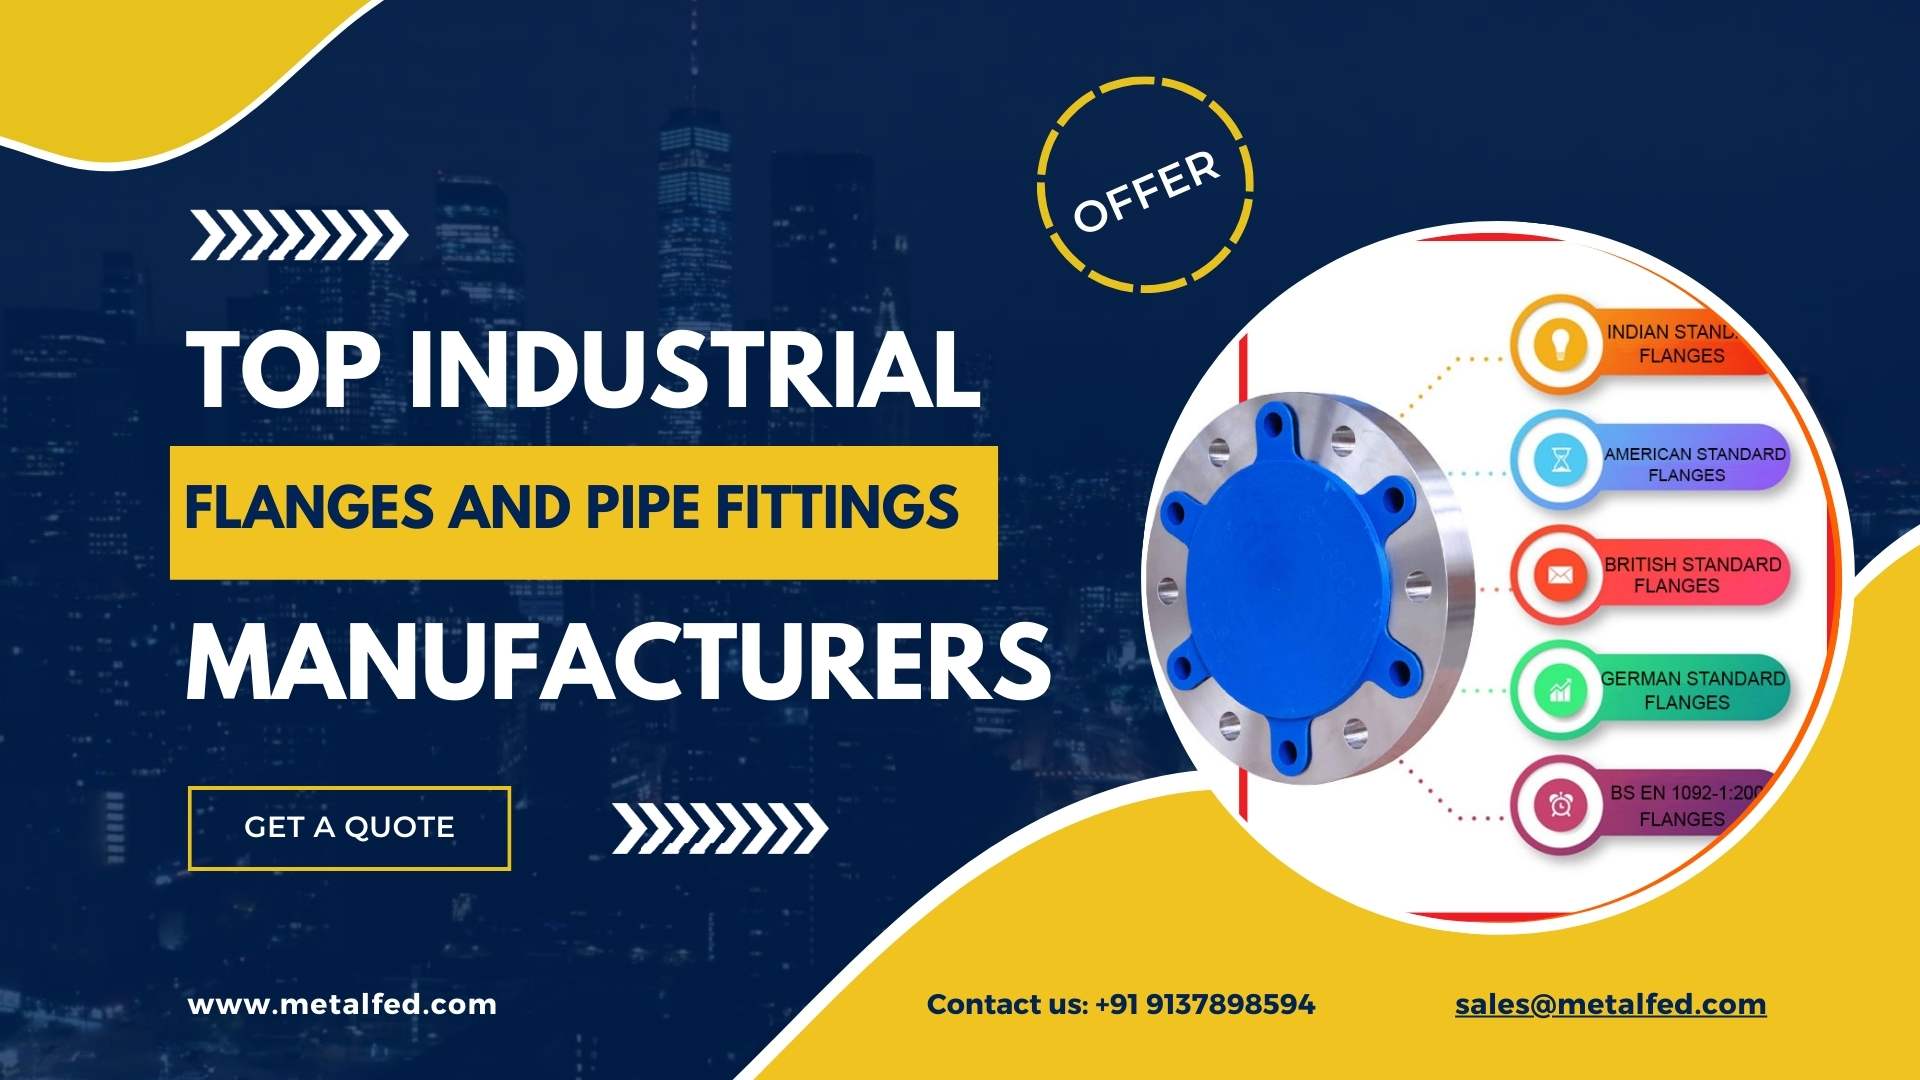 Industrial Flange and Pipe fittings Manufacturers - Exporters!: Welcome to the world of top industrial flange manufacturers and pipe fittings exporters! In 2023 and 2024